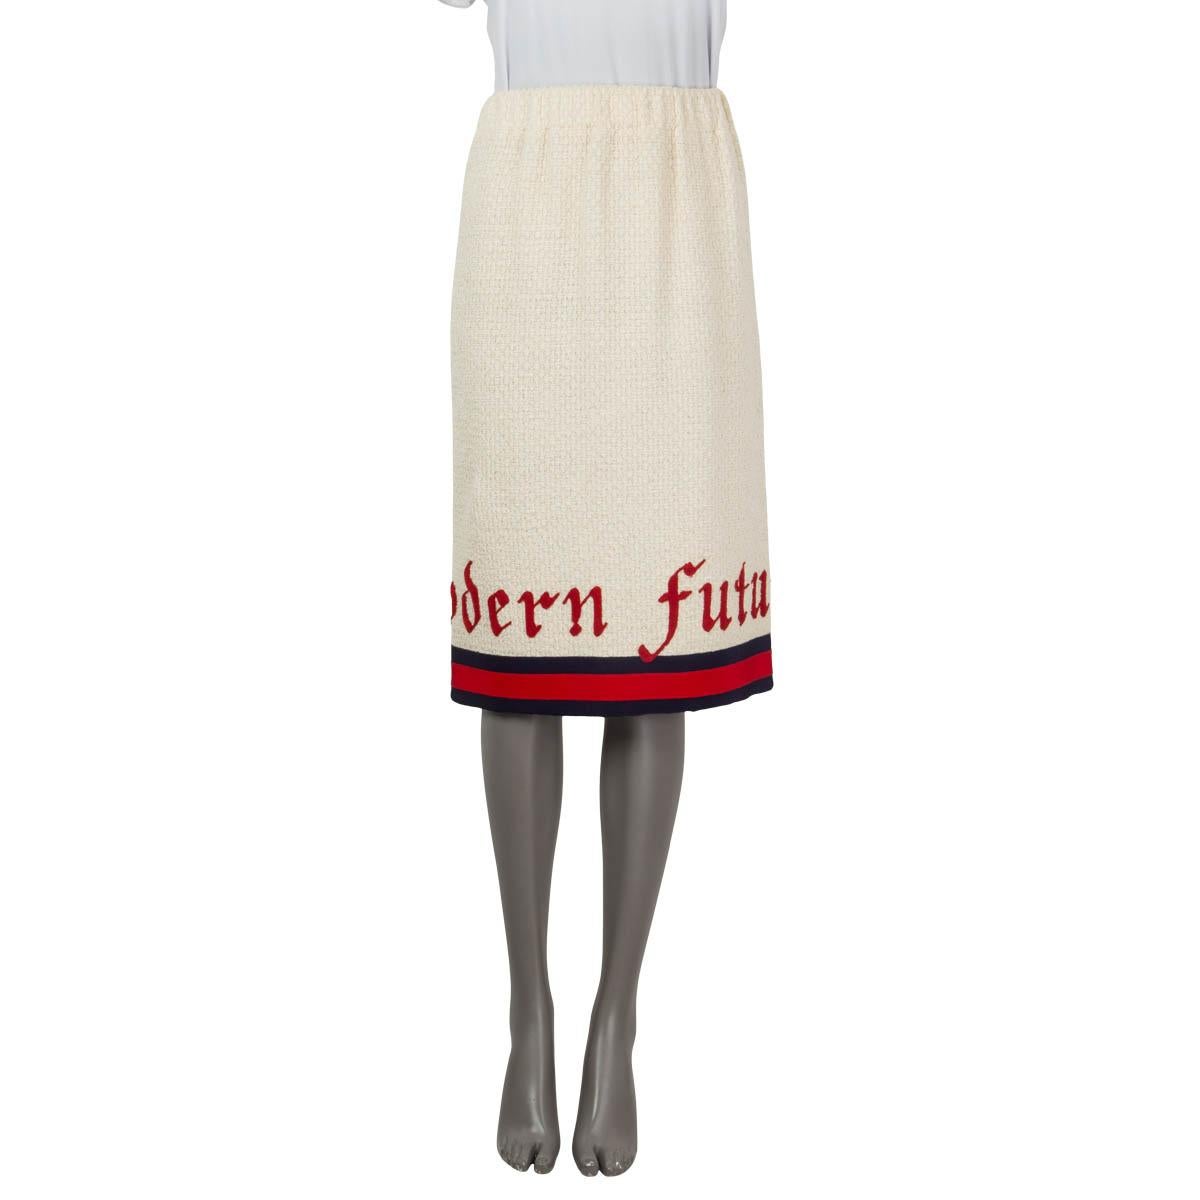 100% authentic Gucci 'Modern Future' skirt in ivory bouclé cotton (88%) and polyamide (12%) with signature web stripe in red and navy cotton (50%) and viscose (50%). Has never been worn. Brand new. 

Spring/summer 2017

Measurements
Tag Size 40
Size